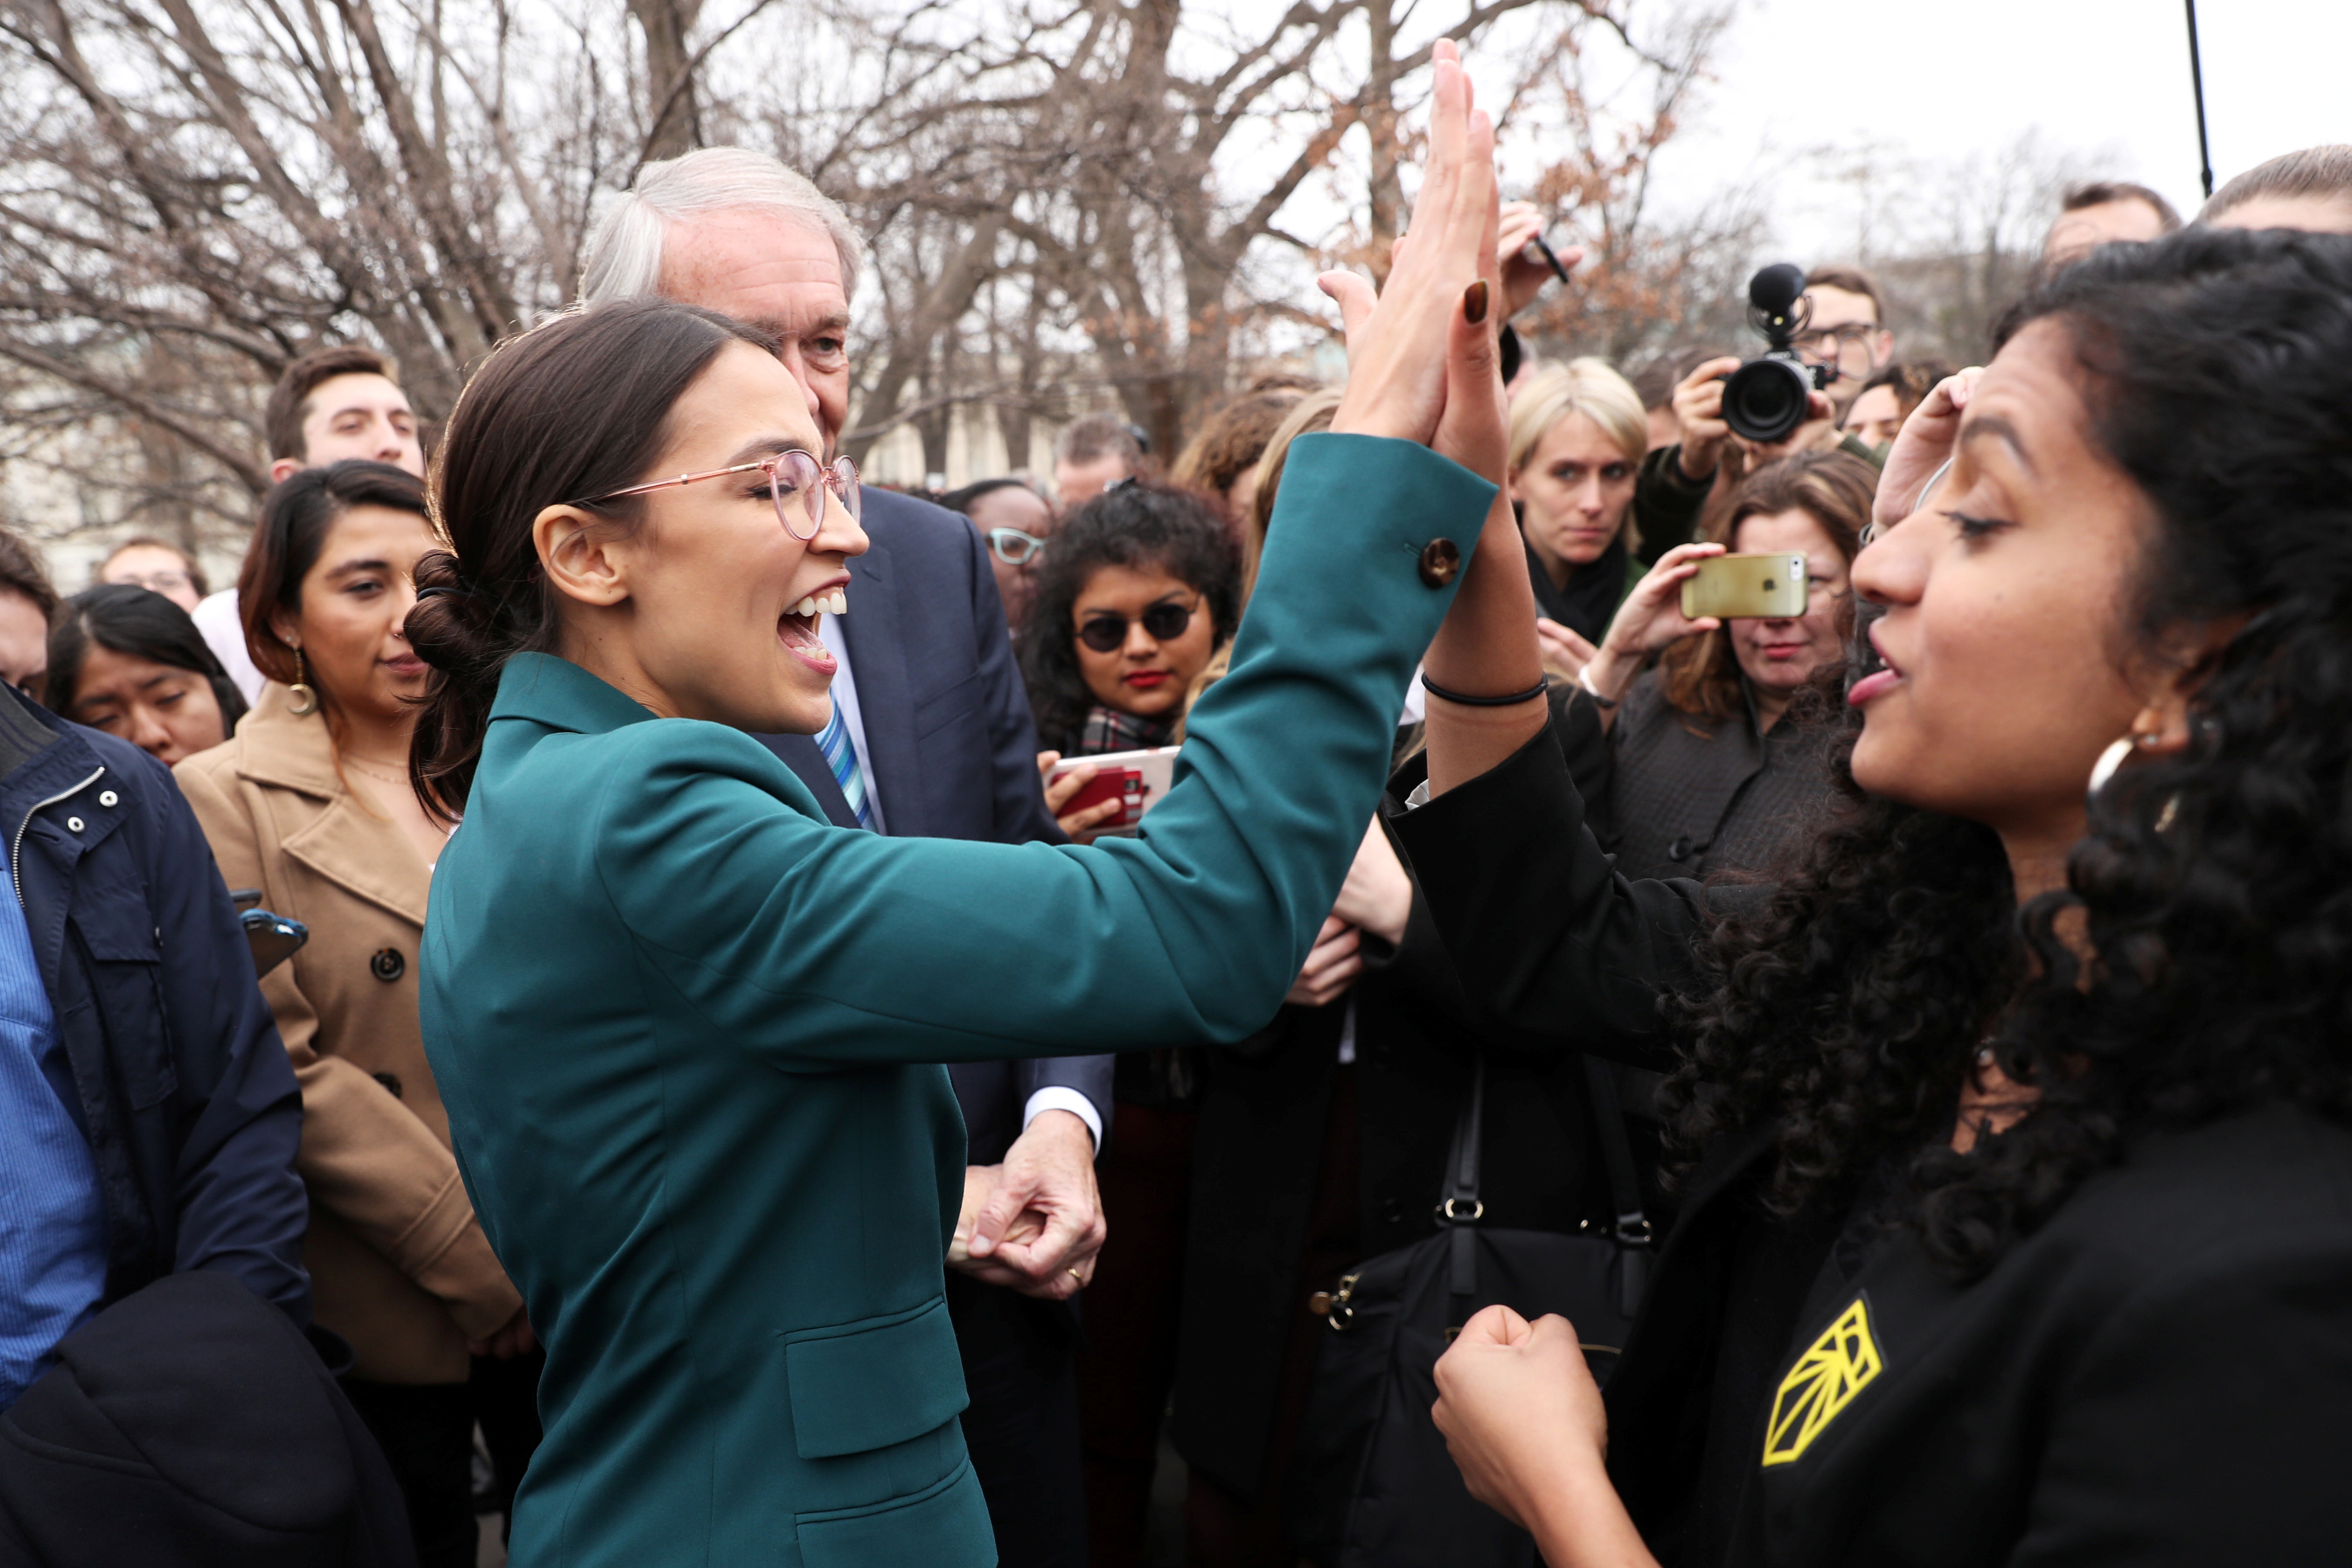 U.S. Representative Ocasio-Cortez and Senator Markey celebrate with activists after a news conference for their proposed "Green New Deal" at the U.S. Capitol in Washington